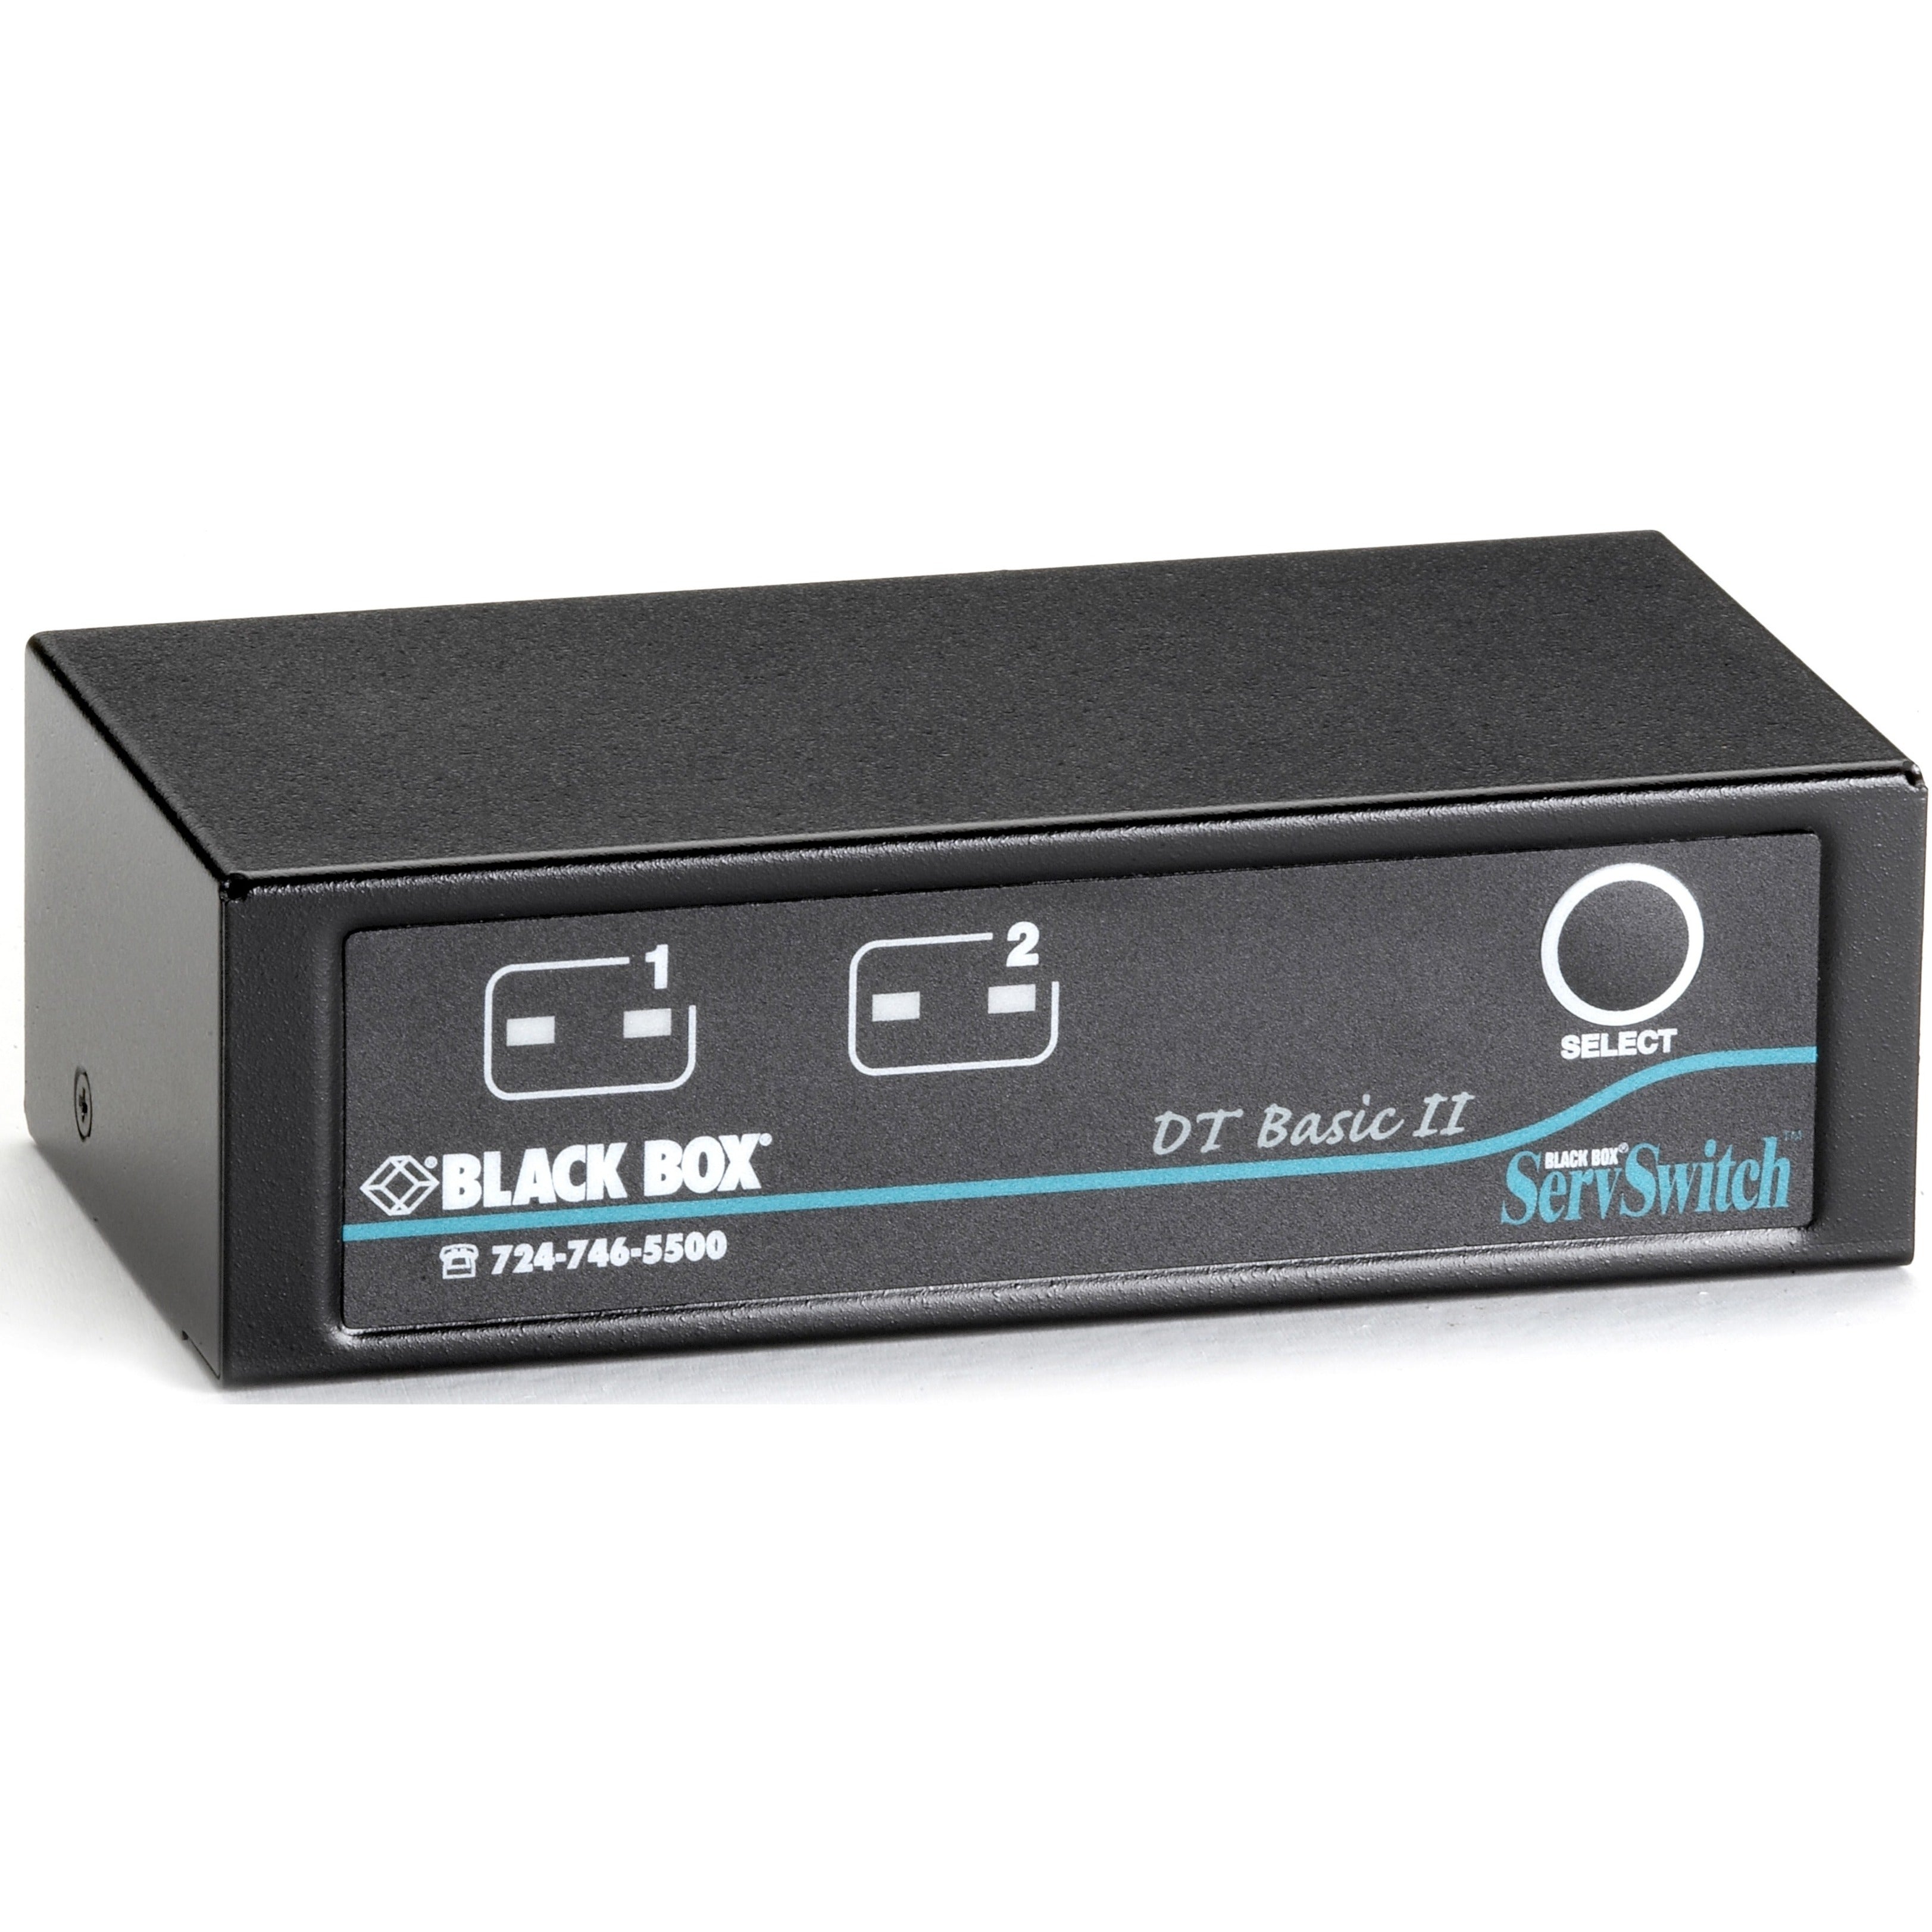 Black Box KV7022A ServSwitch DT Basic II KVM Switch, PS/2 Port, 2 Computers Supported